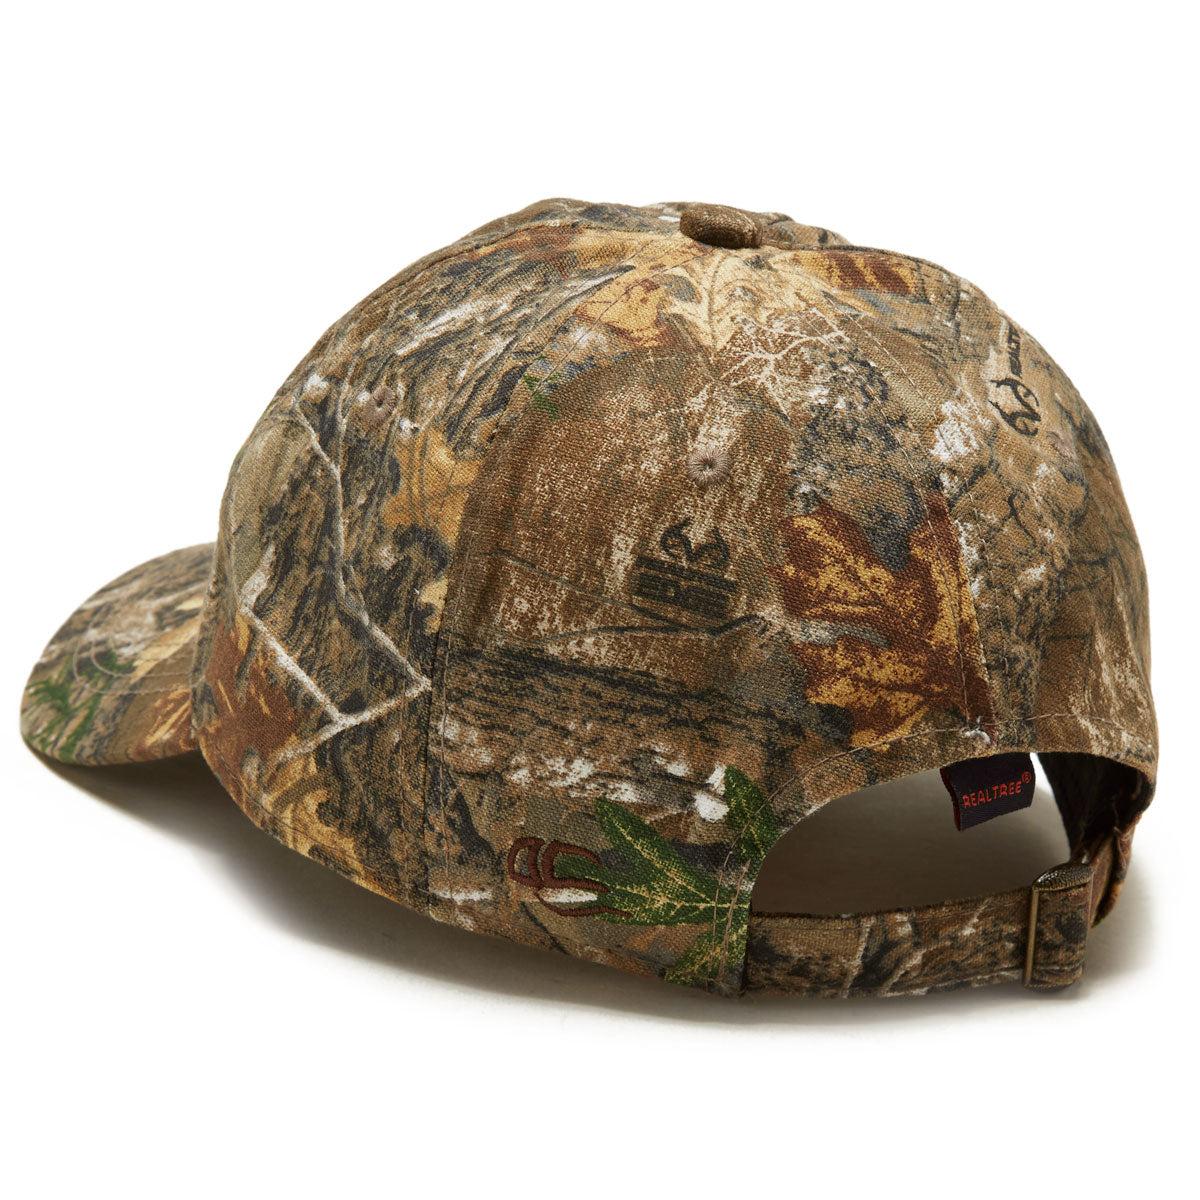 CCS x Realtree Embroidered Mailorder Hat - Edge image 2